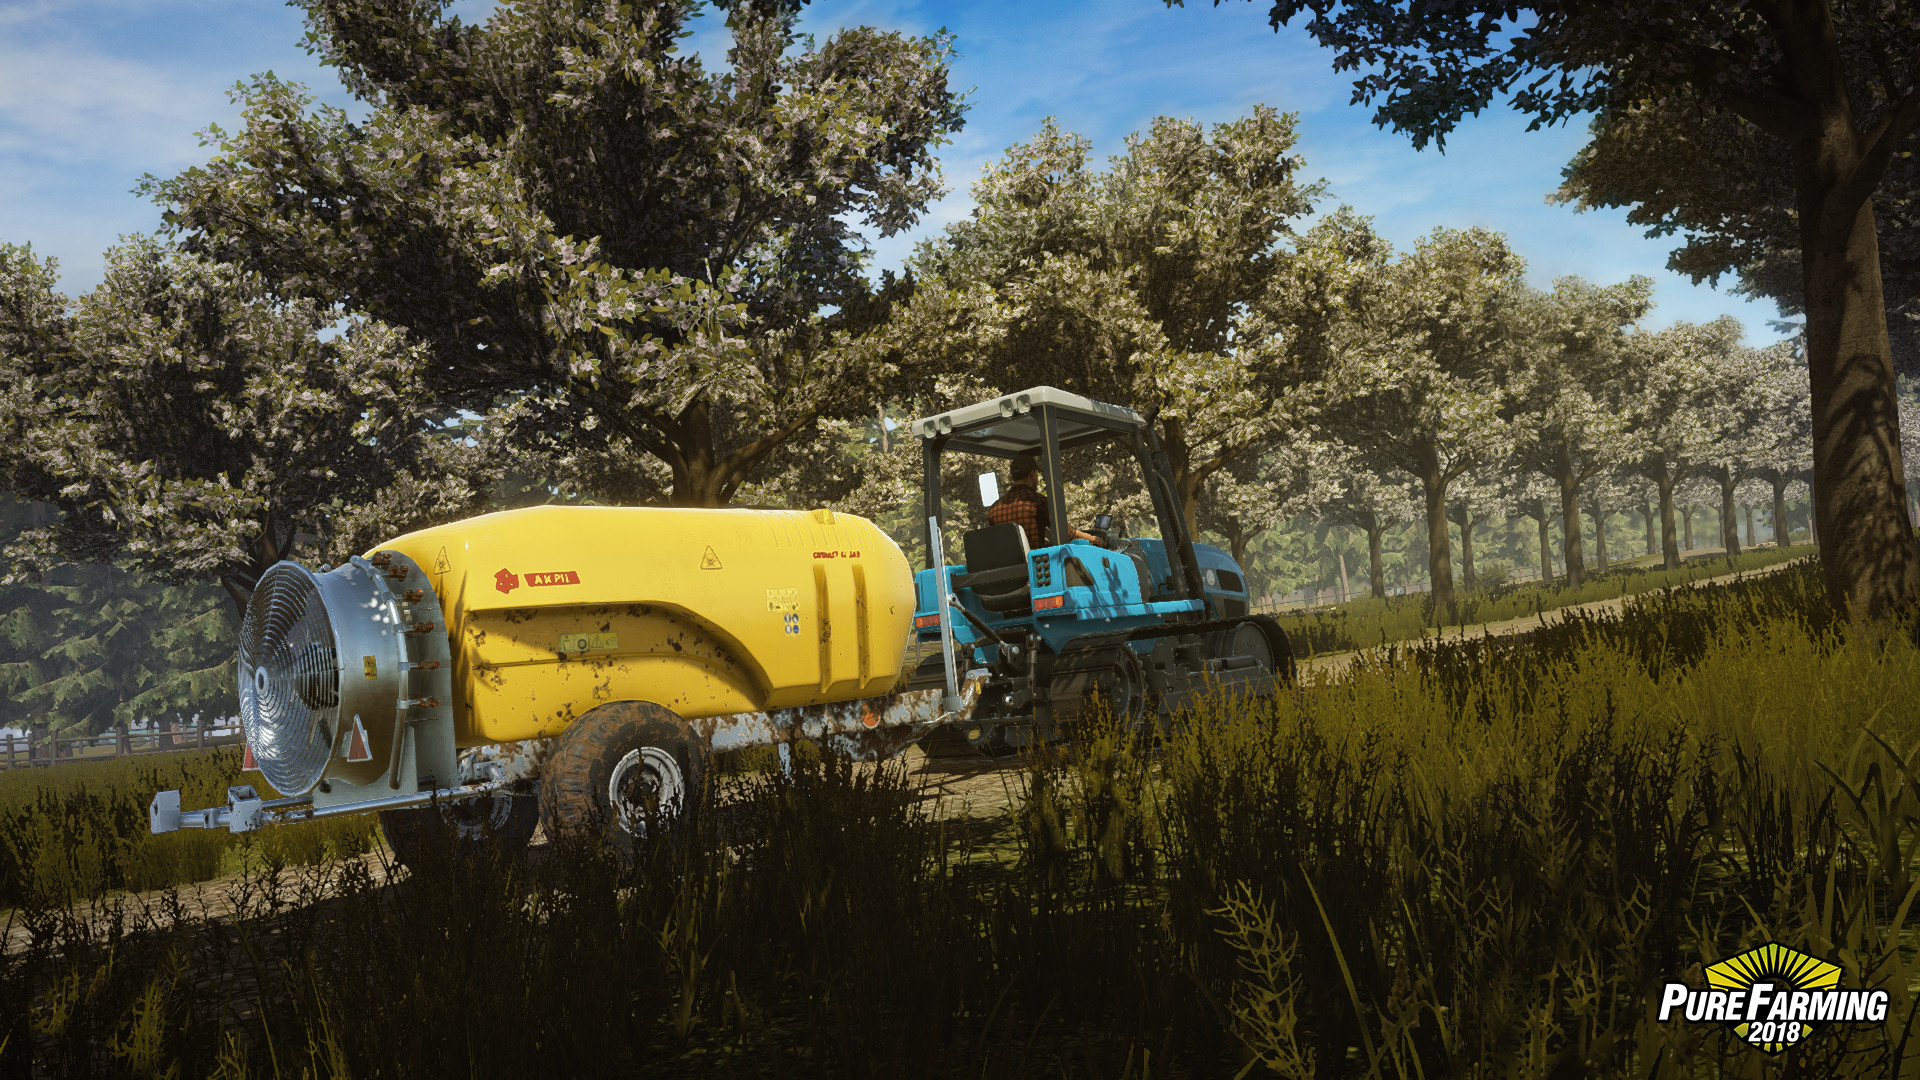 Save 90% on Pure Farming 2018 on Steam